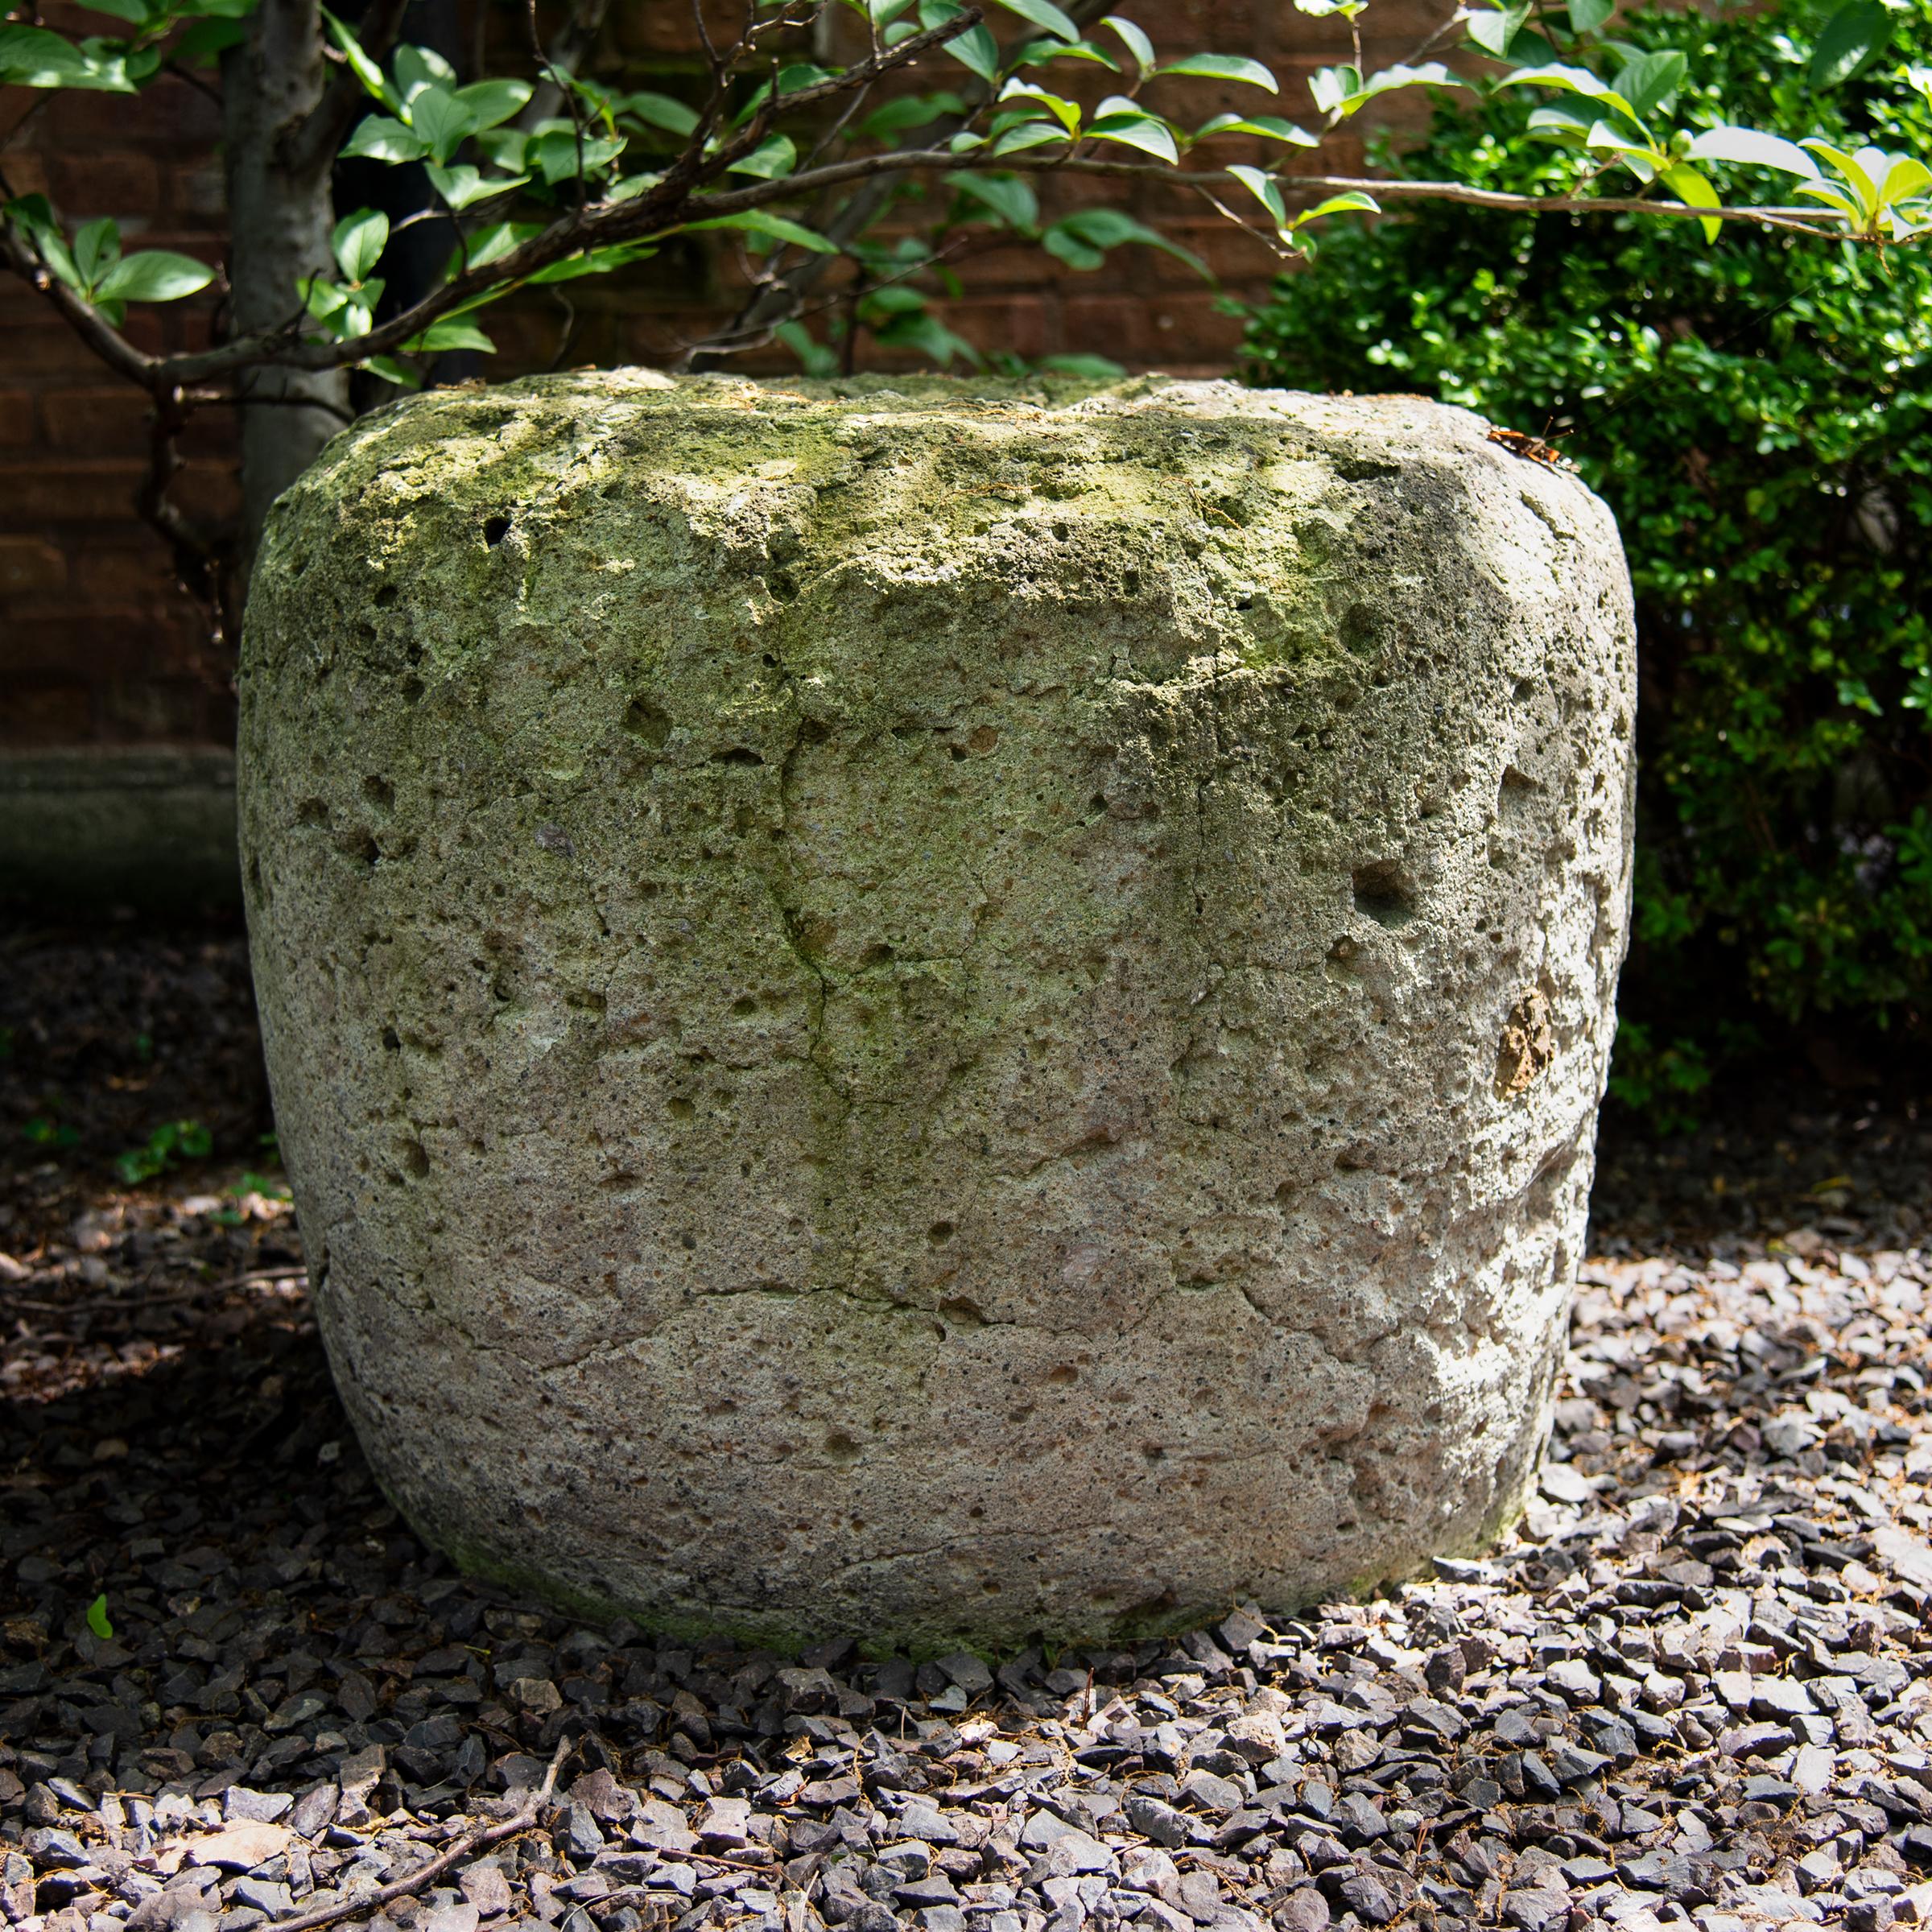 Simply shaped with an elegant form, this large limestone vessel is actually a runner stone, a key component to a traditional Chinese grain mill. Set atop an extensively carved mill stone, the runner stone was harnessed to a donkey or mule that